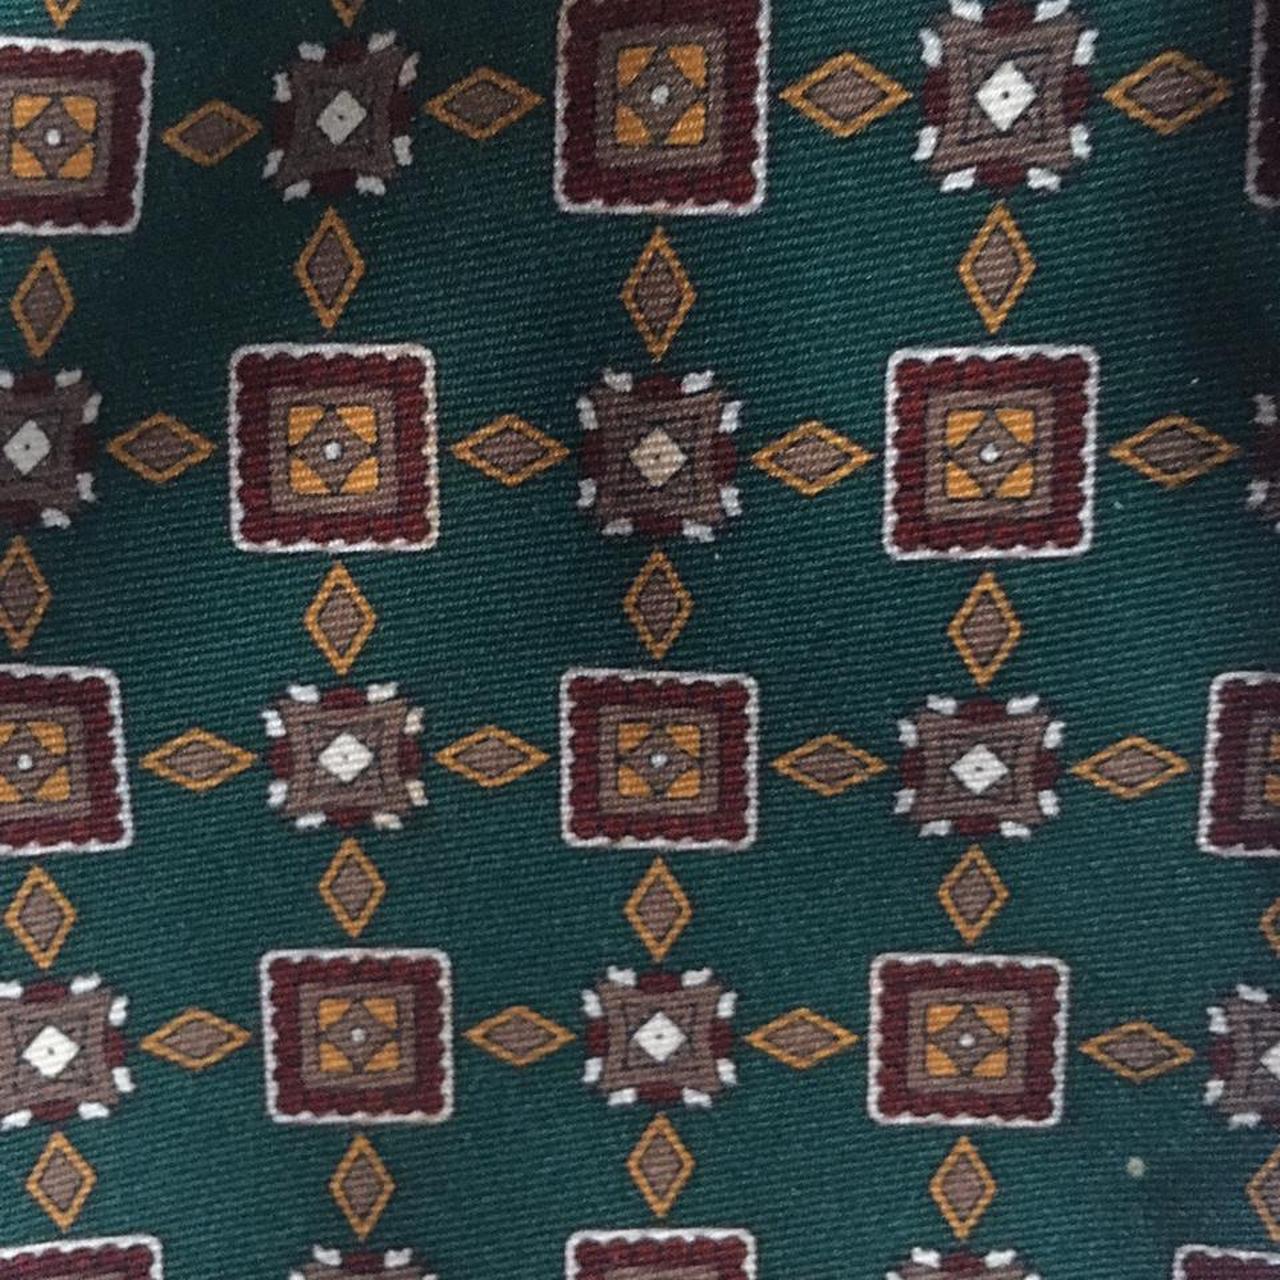 Product Image 4 - Vintage green tie from the